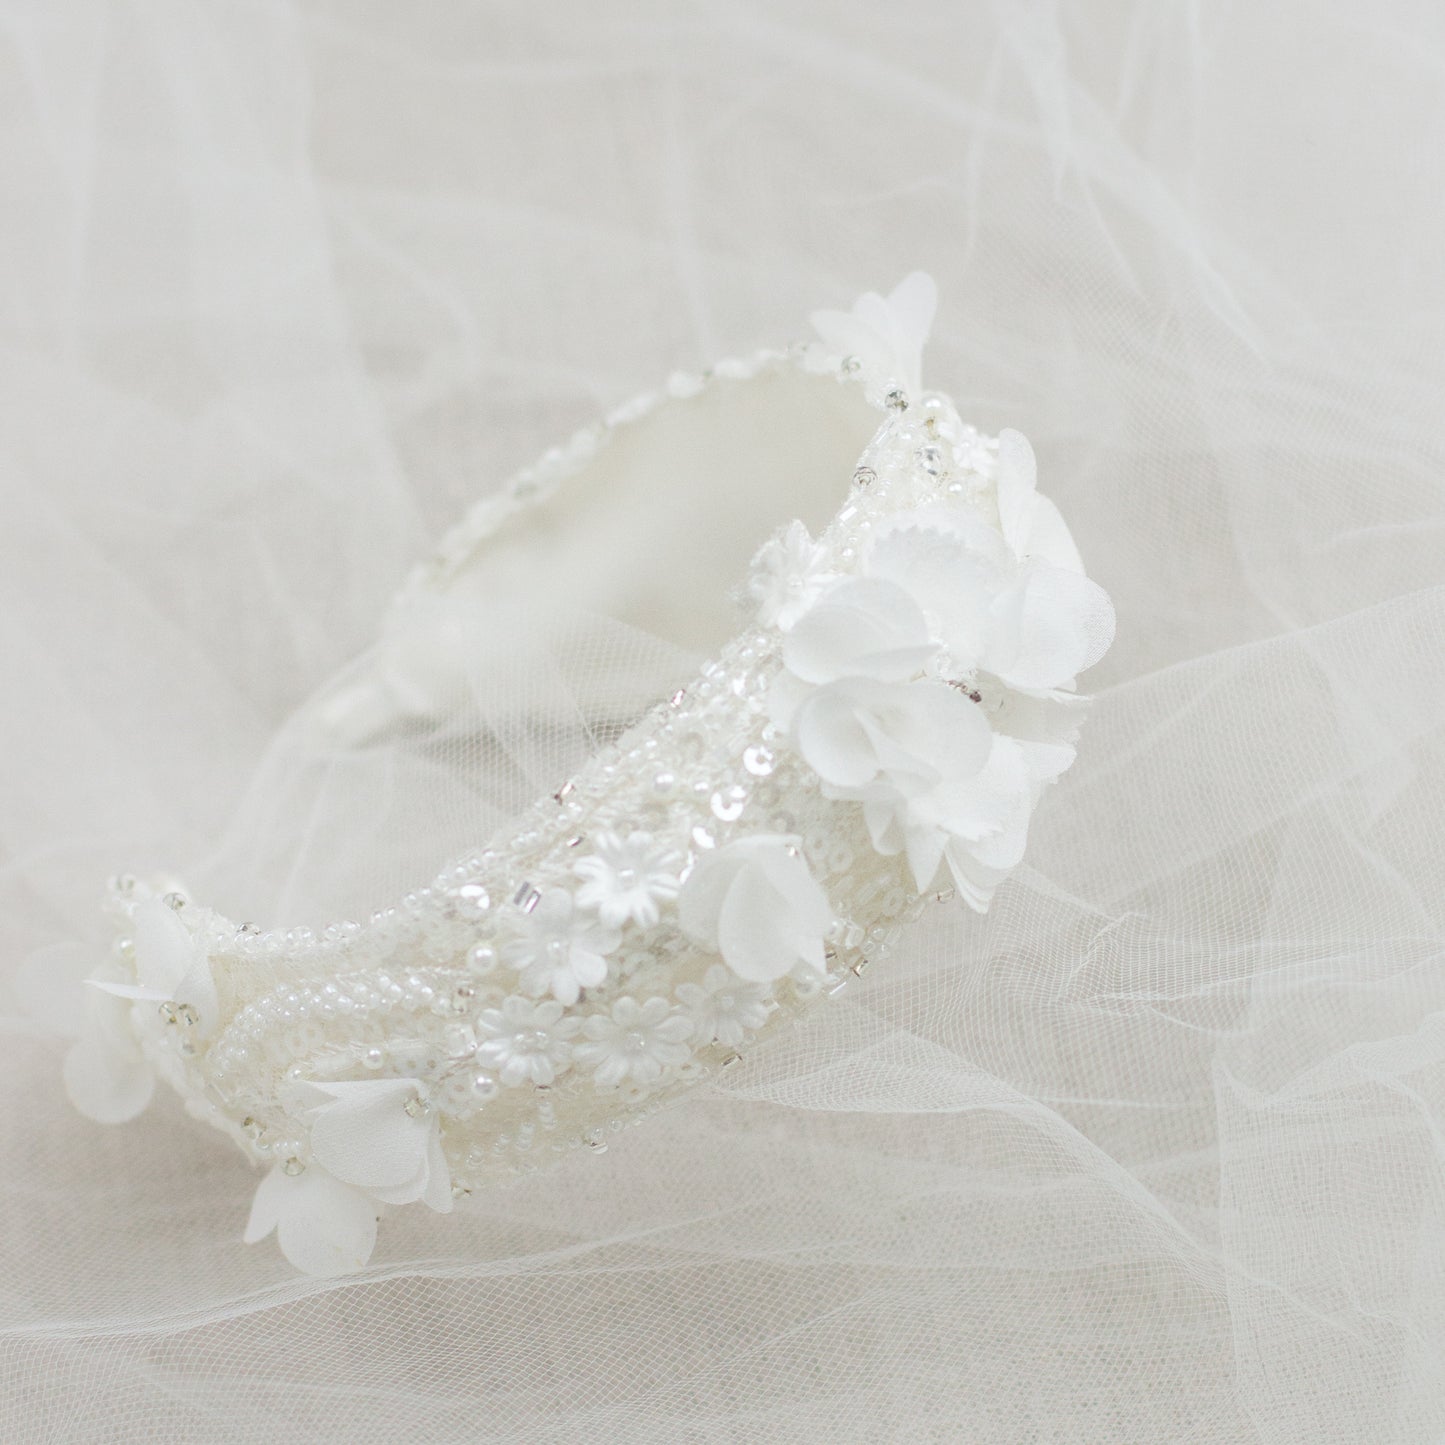 Ivory lace headband. Floral Bridal headpiece. Wedding hair accessories. Embroidered hairpiece. 3D Head fascinator. Lace headband